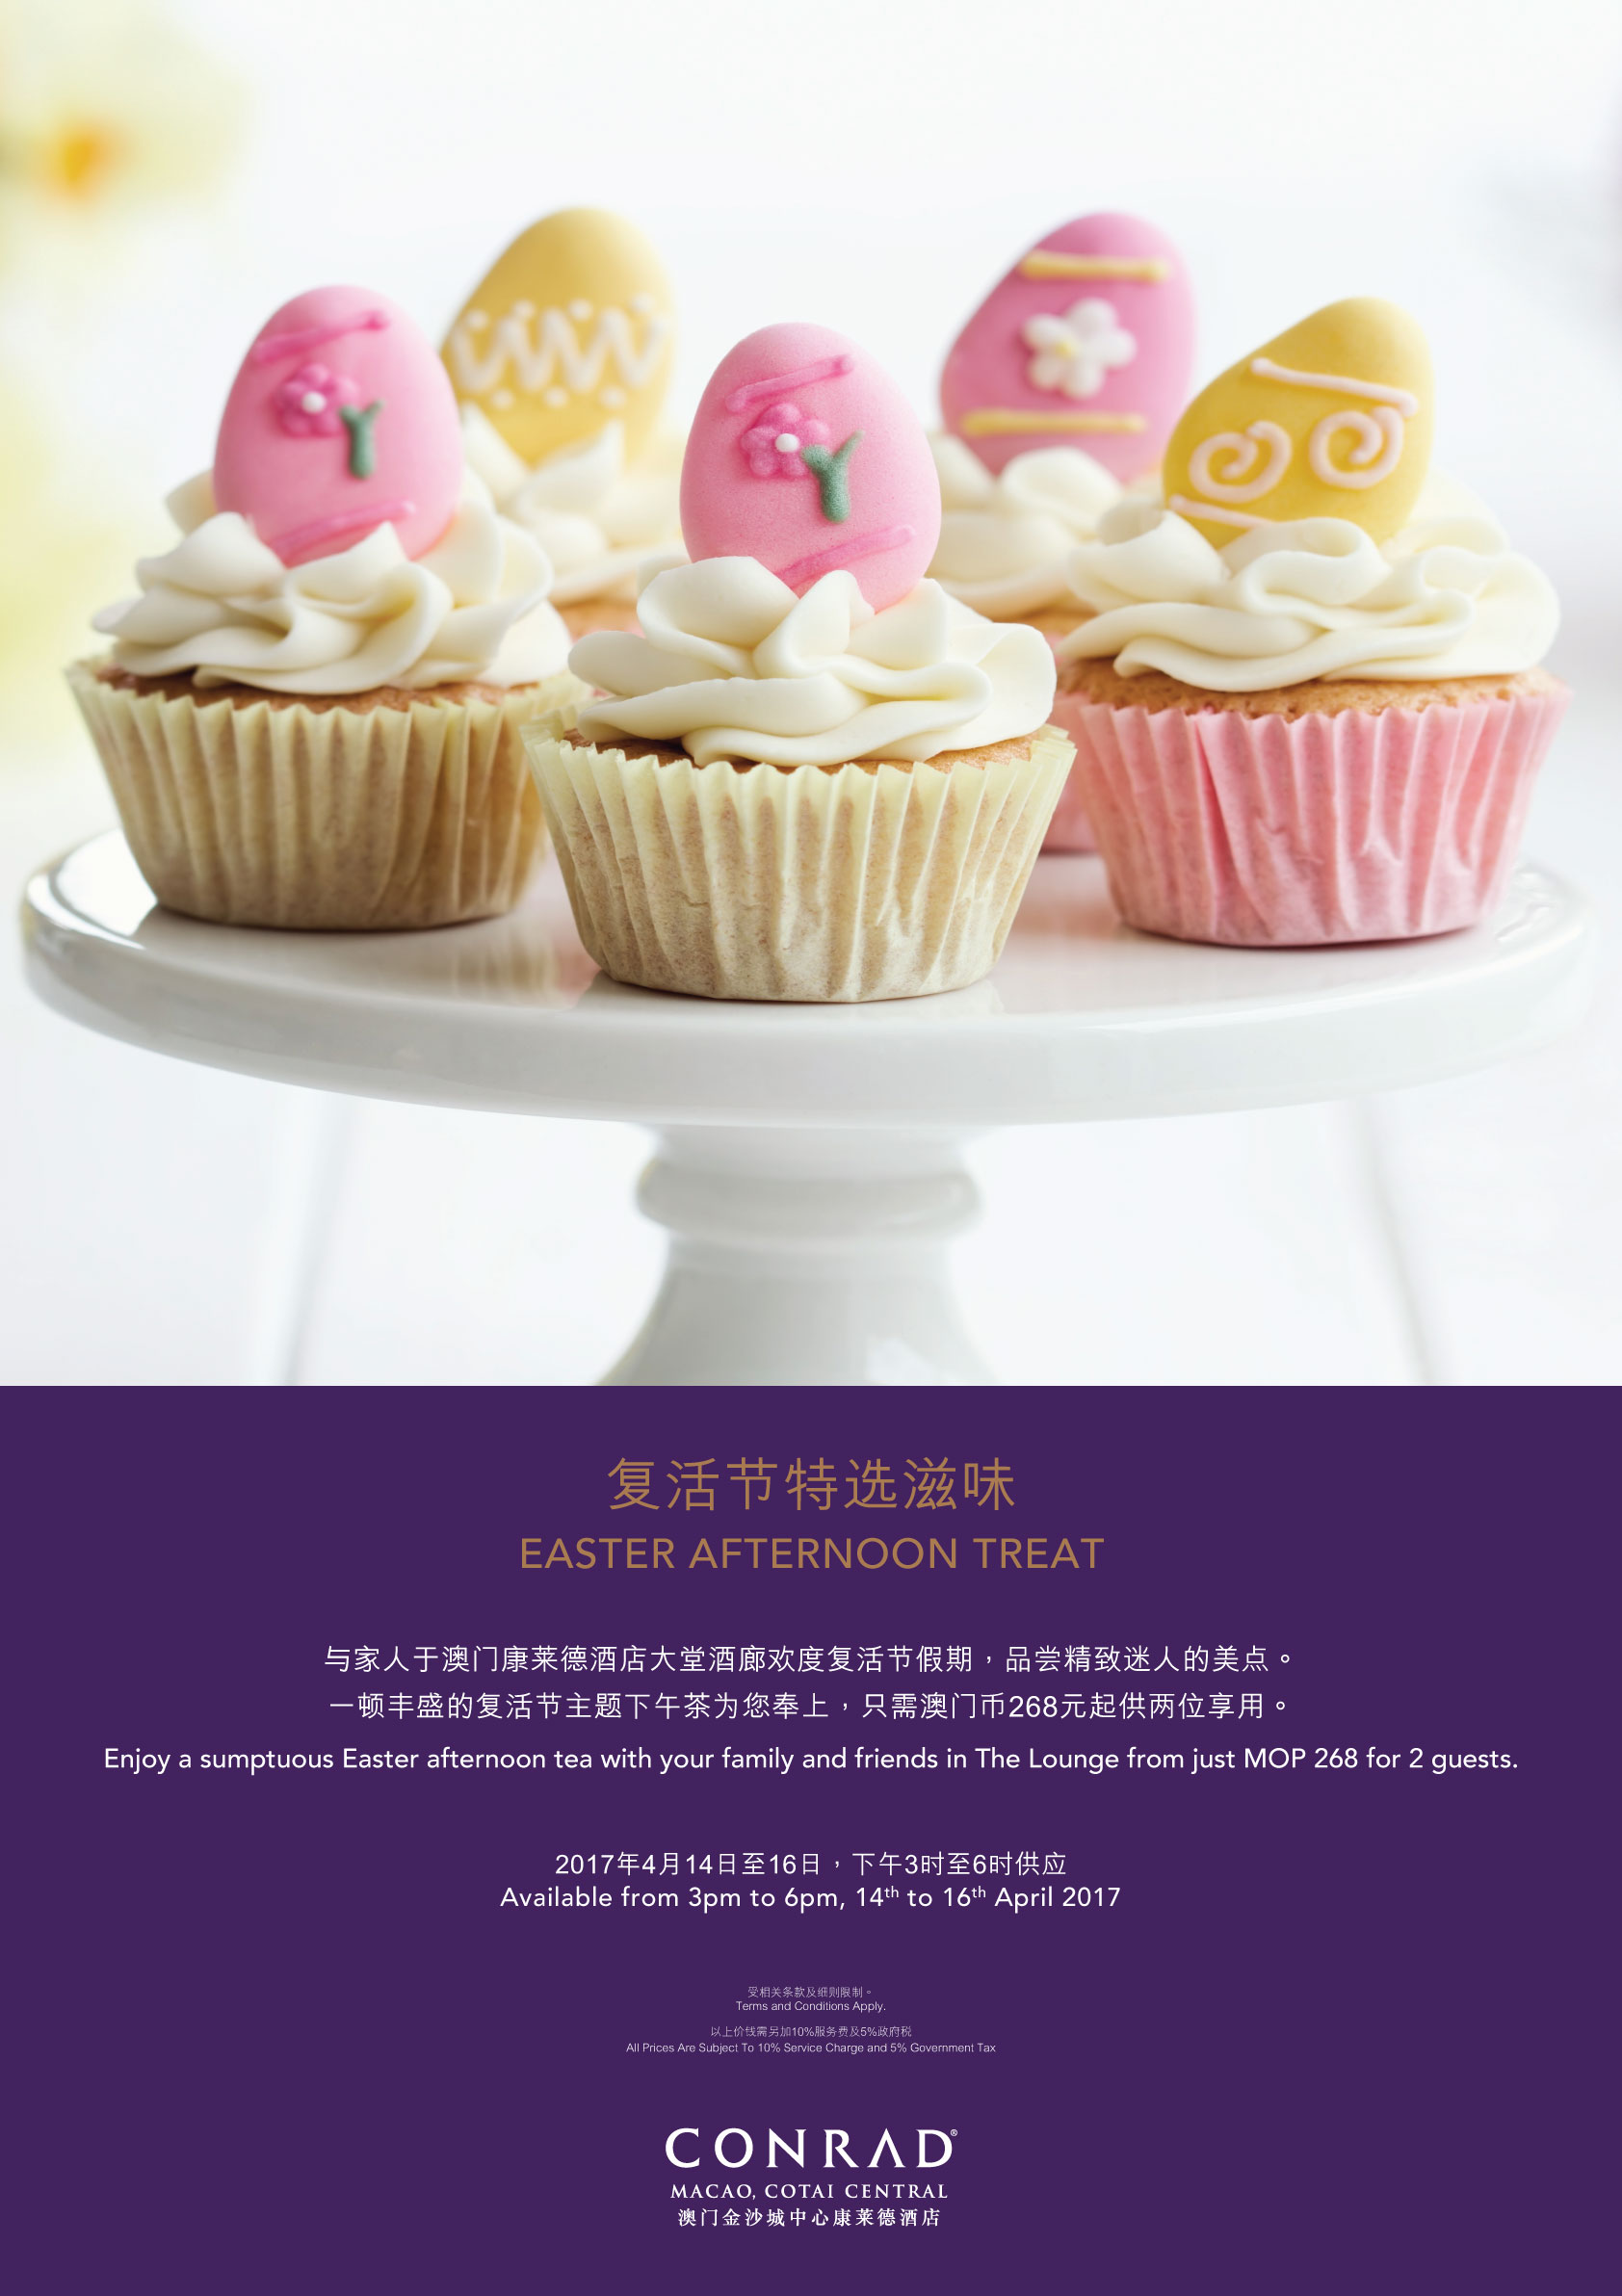 Enjoy_a_delightful_Easter_afternoon_at_the_Conrad_Lobby_Lounge